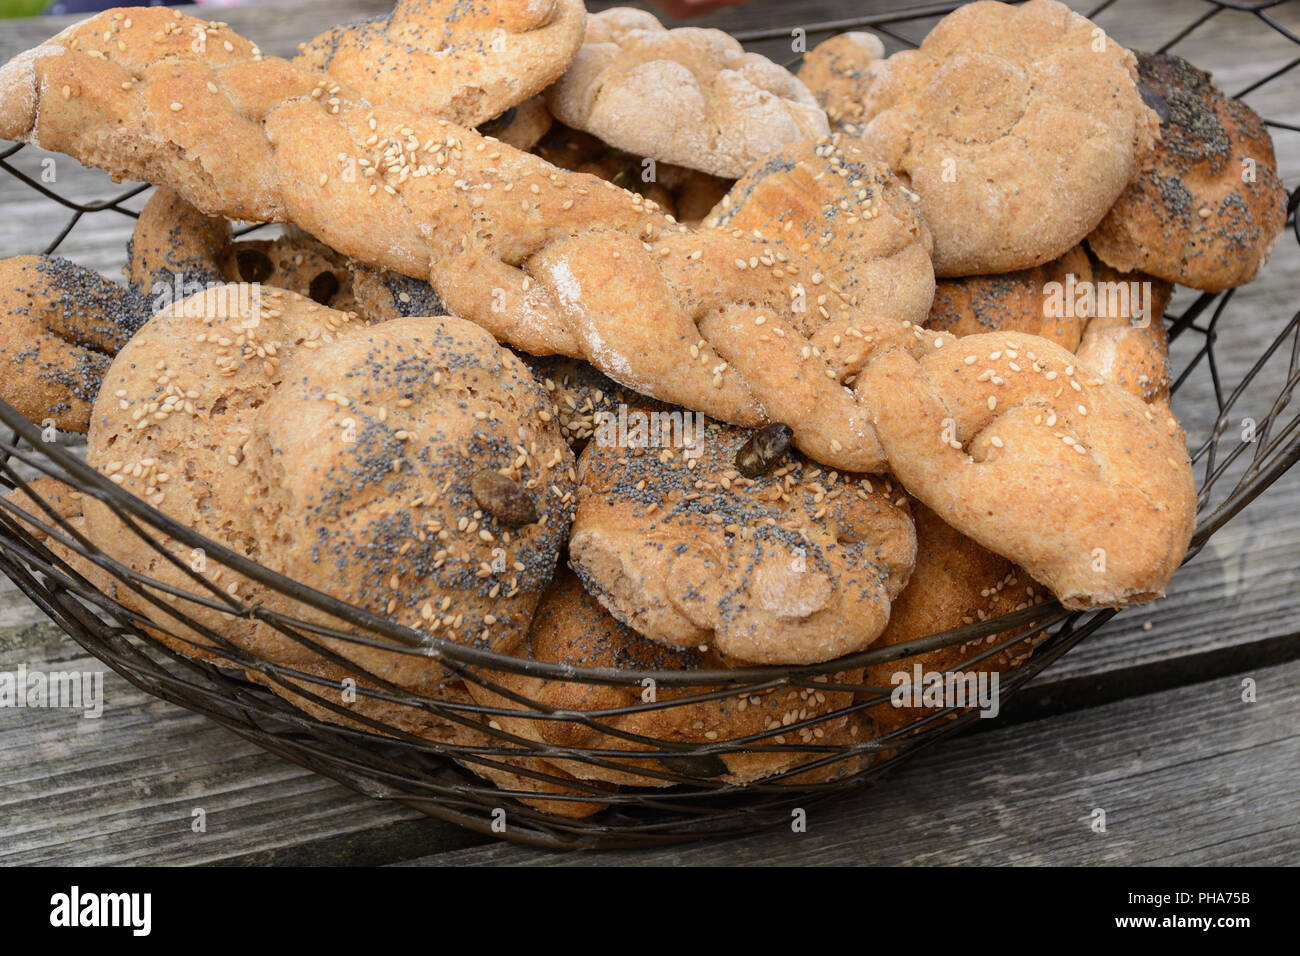 Home-baked whole-grain bread rolls in rusical bread basket Stock Photo